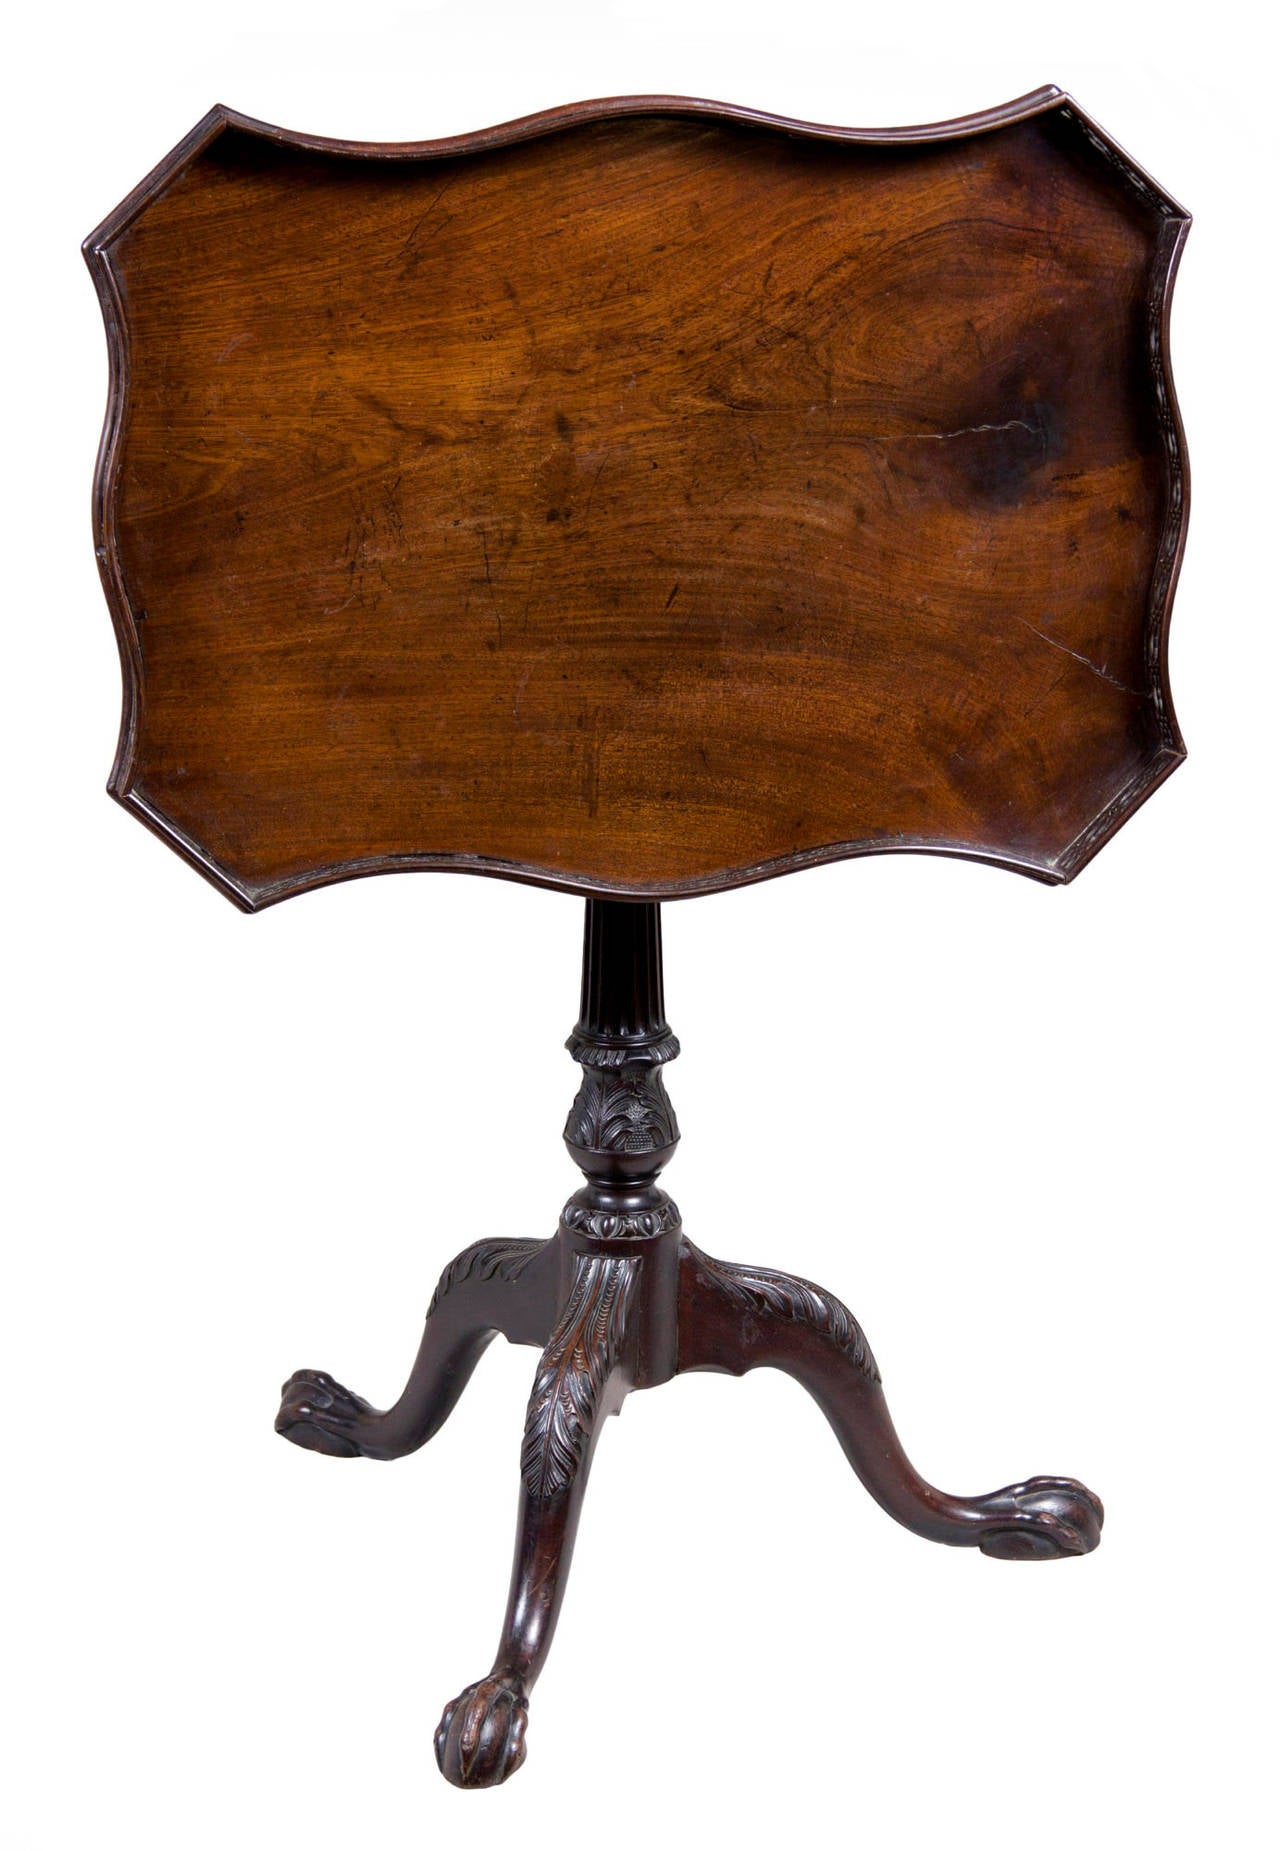 These tilt-top tables with pierced galleries are often called silver tables, as this would accommodate a tea service with a protective edge. The top is composed of a beautiful piece of mahogany with a wonderful patina with age shrinkage and a